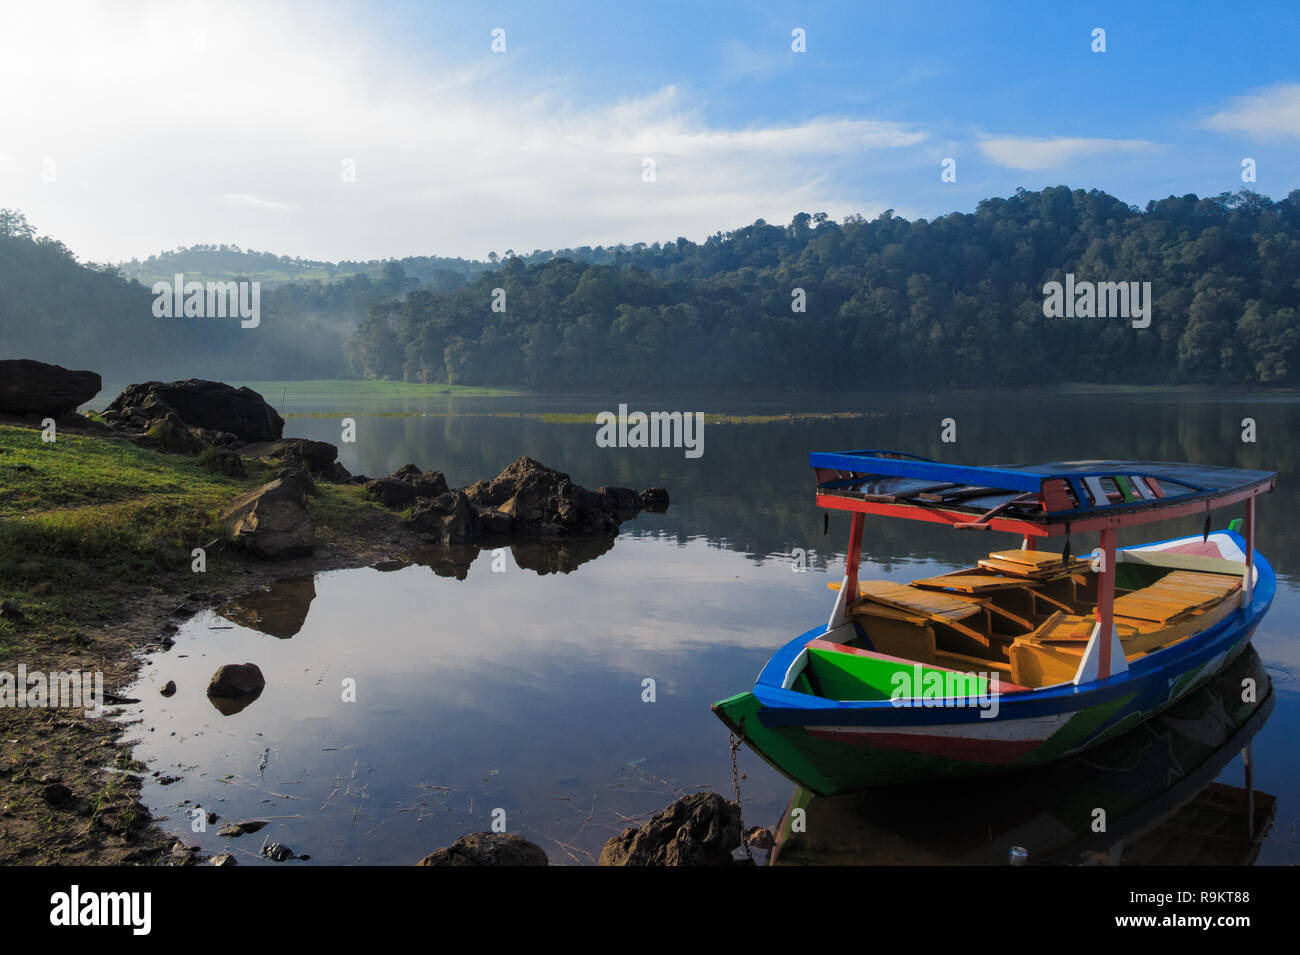 A picnic boat in Ciwidey lake, south of bandung, Indonesia Stock Photo